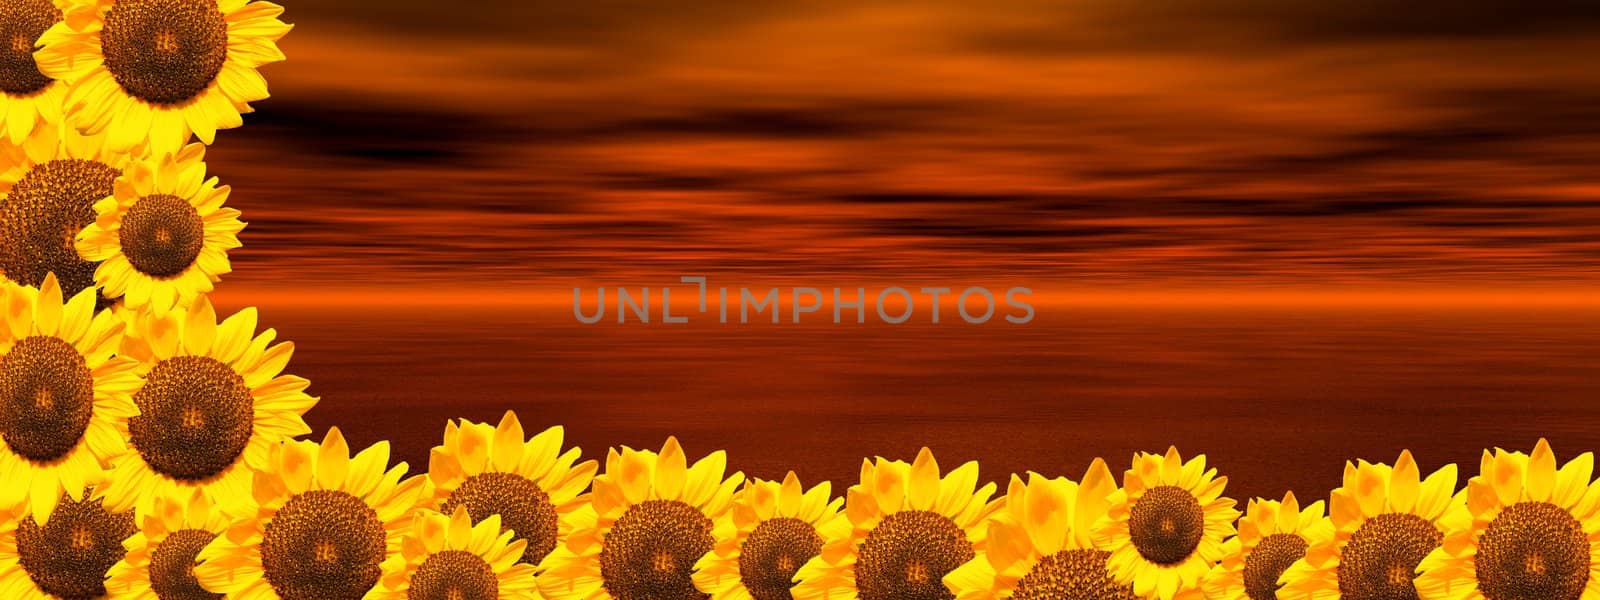 Background of cloudy red sky and ocean with lots of sunflowers on down and on the left side